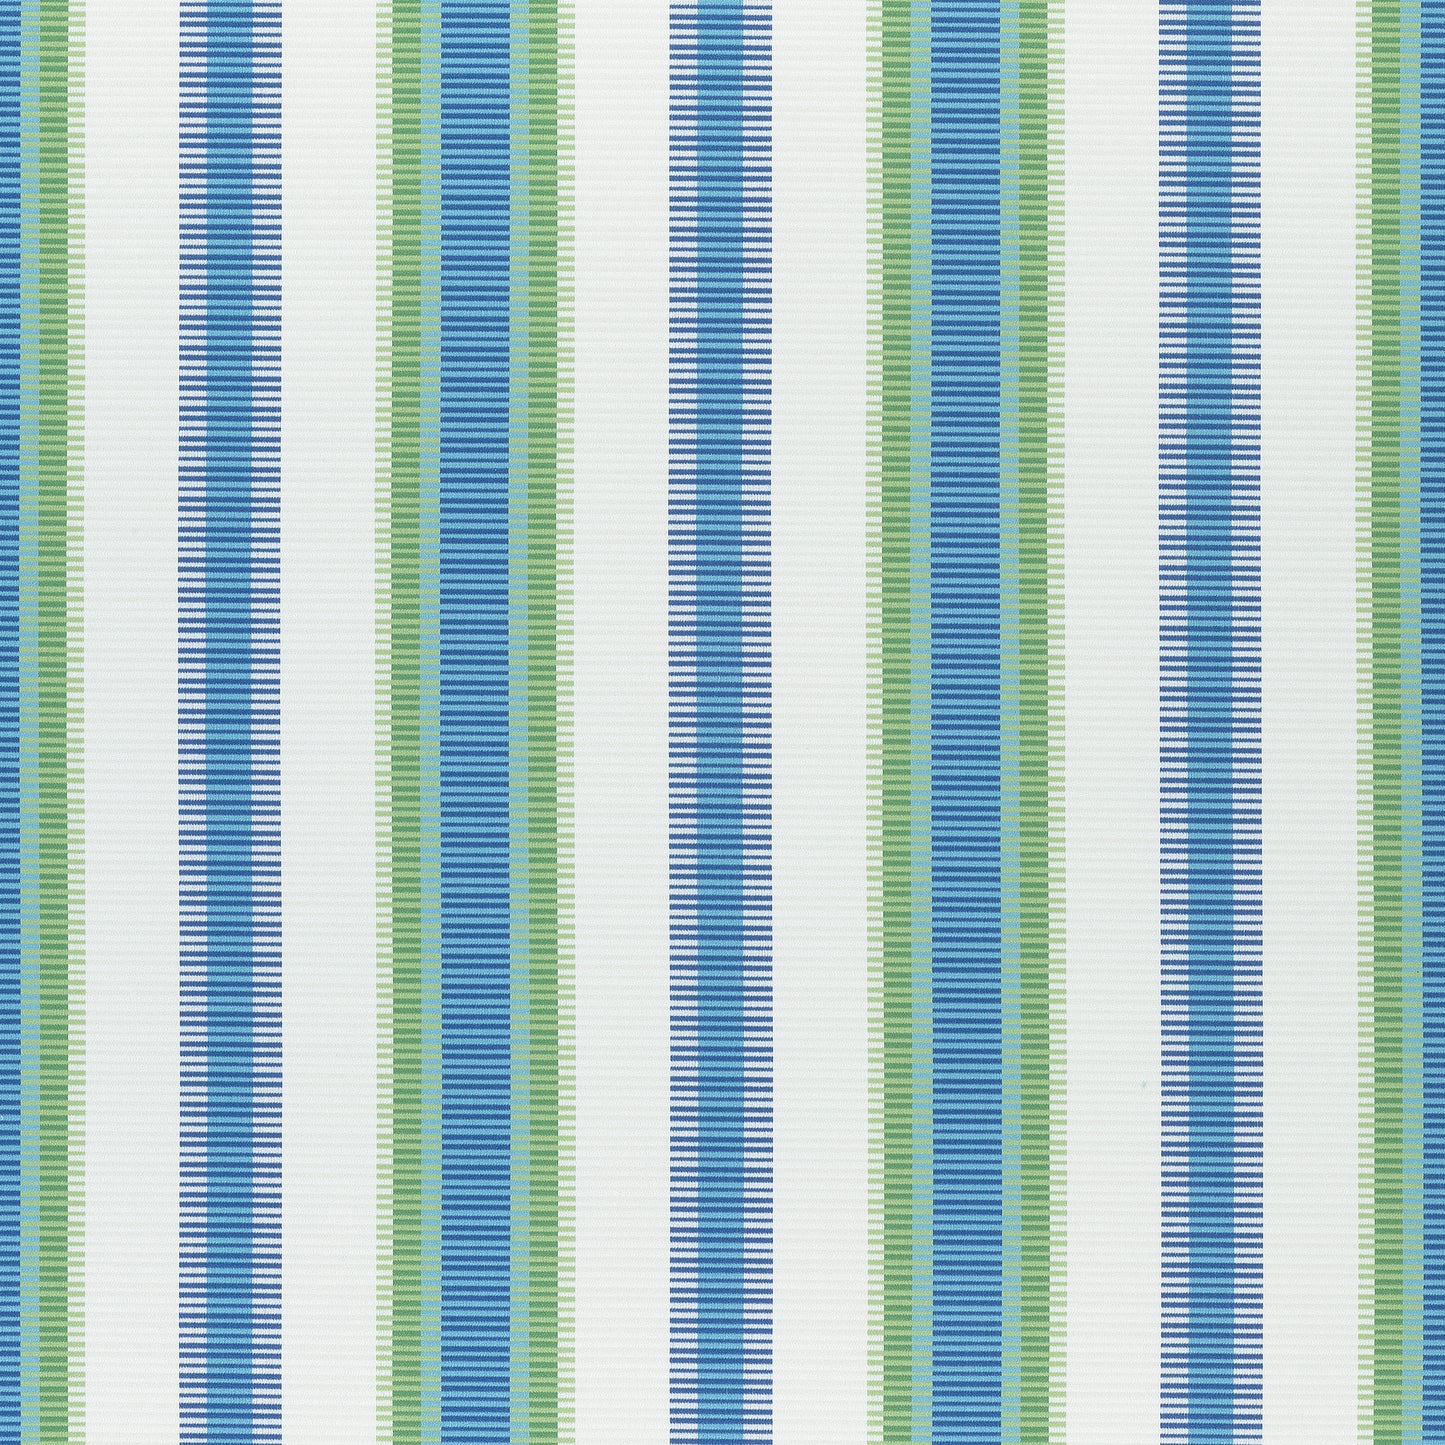 Purchase Thibaut Fabric Item W74670 pattern name Samba Stripe color Royal Blue and Green